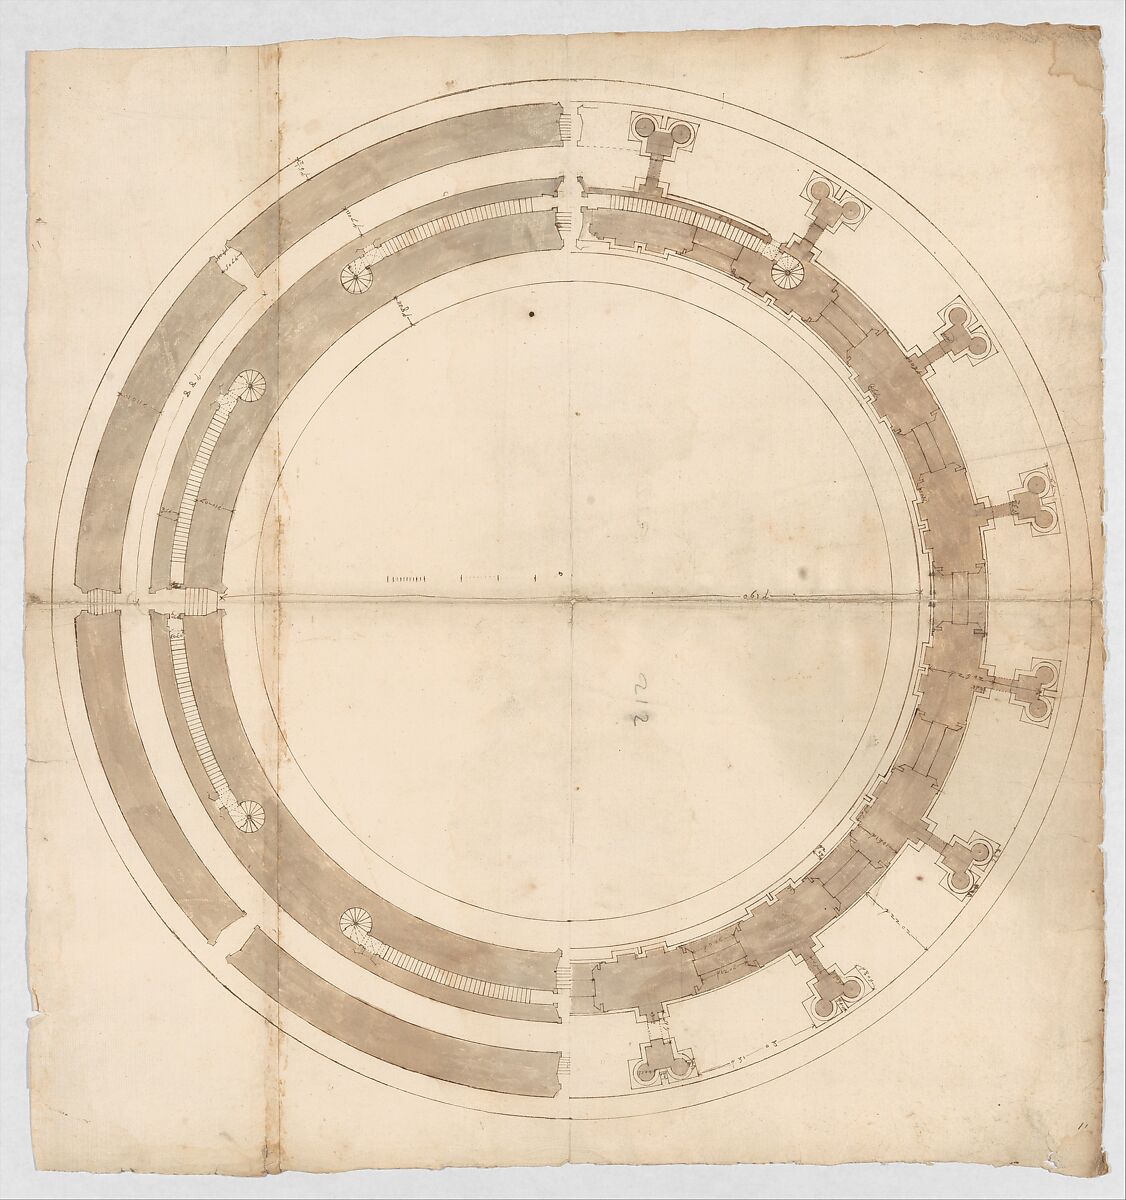 St. Peter's, drum, plans at two levels (recto) blank (verso), Anonymous, French, 16th century  French, Dark brown ink, black chalk, and incised lines